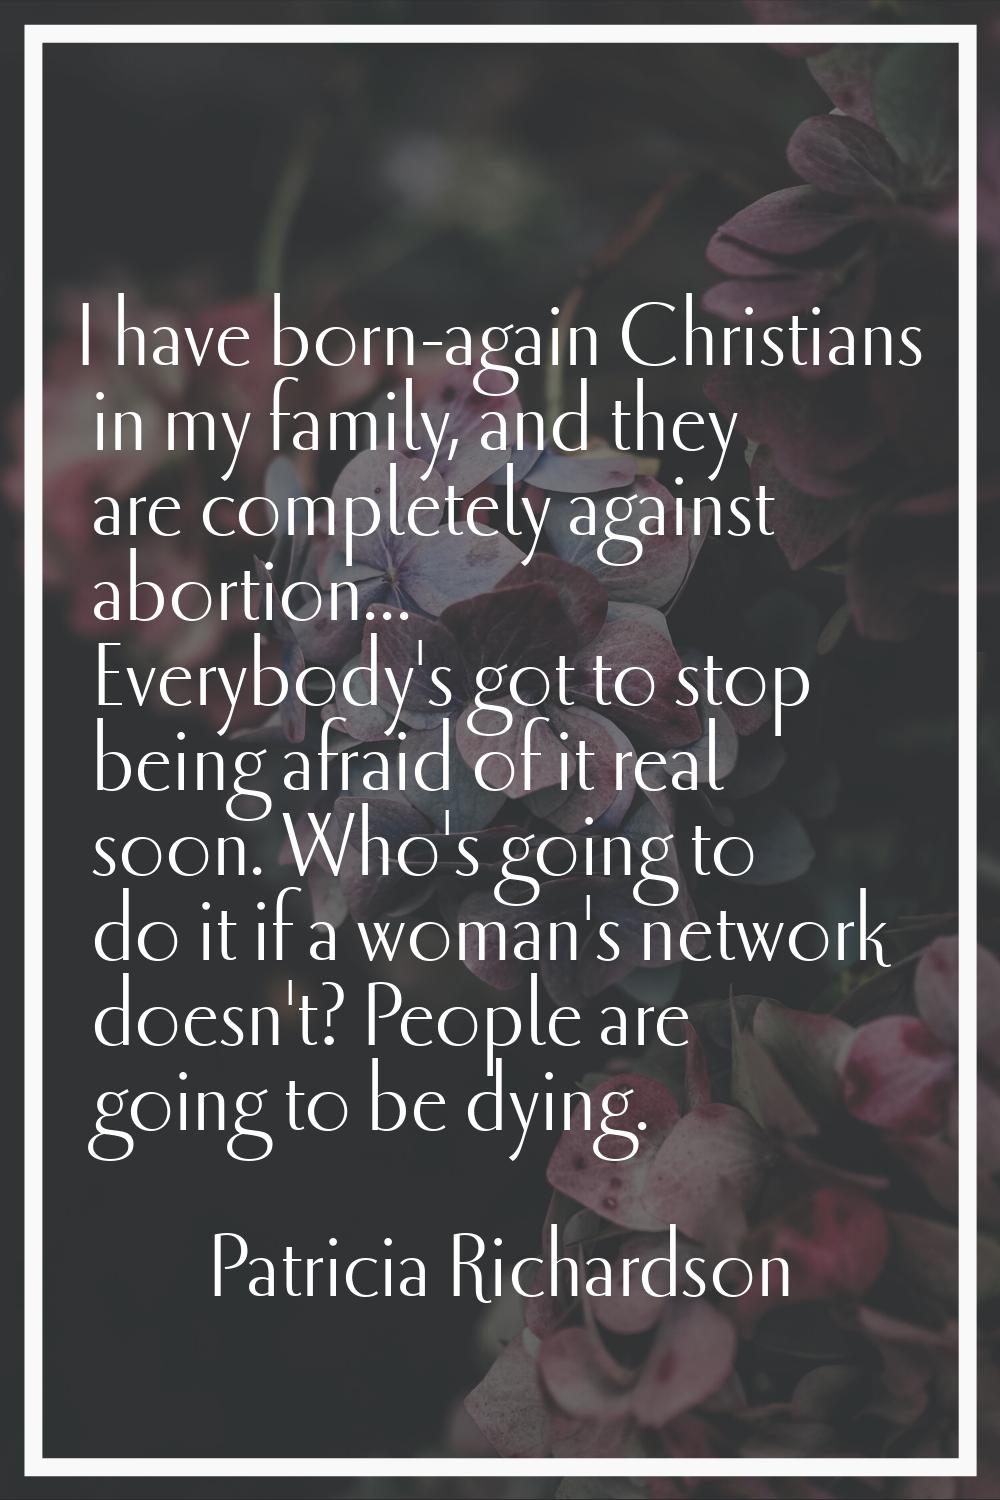 I have born-again Christians in my family, and they are completely against abortion... Everybody's 